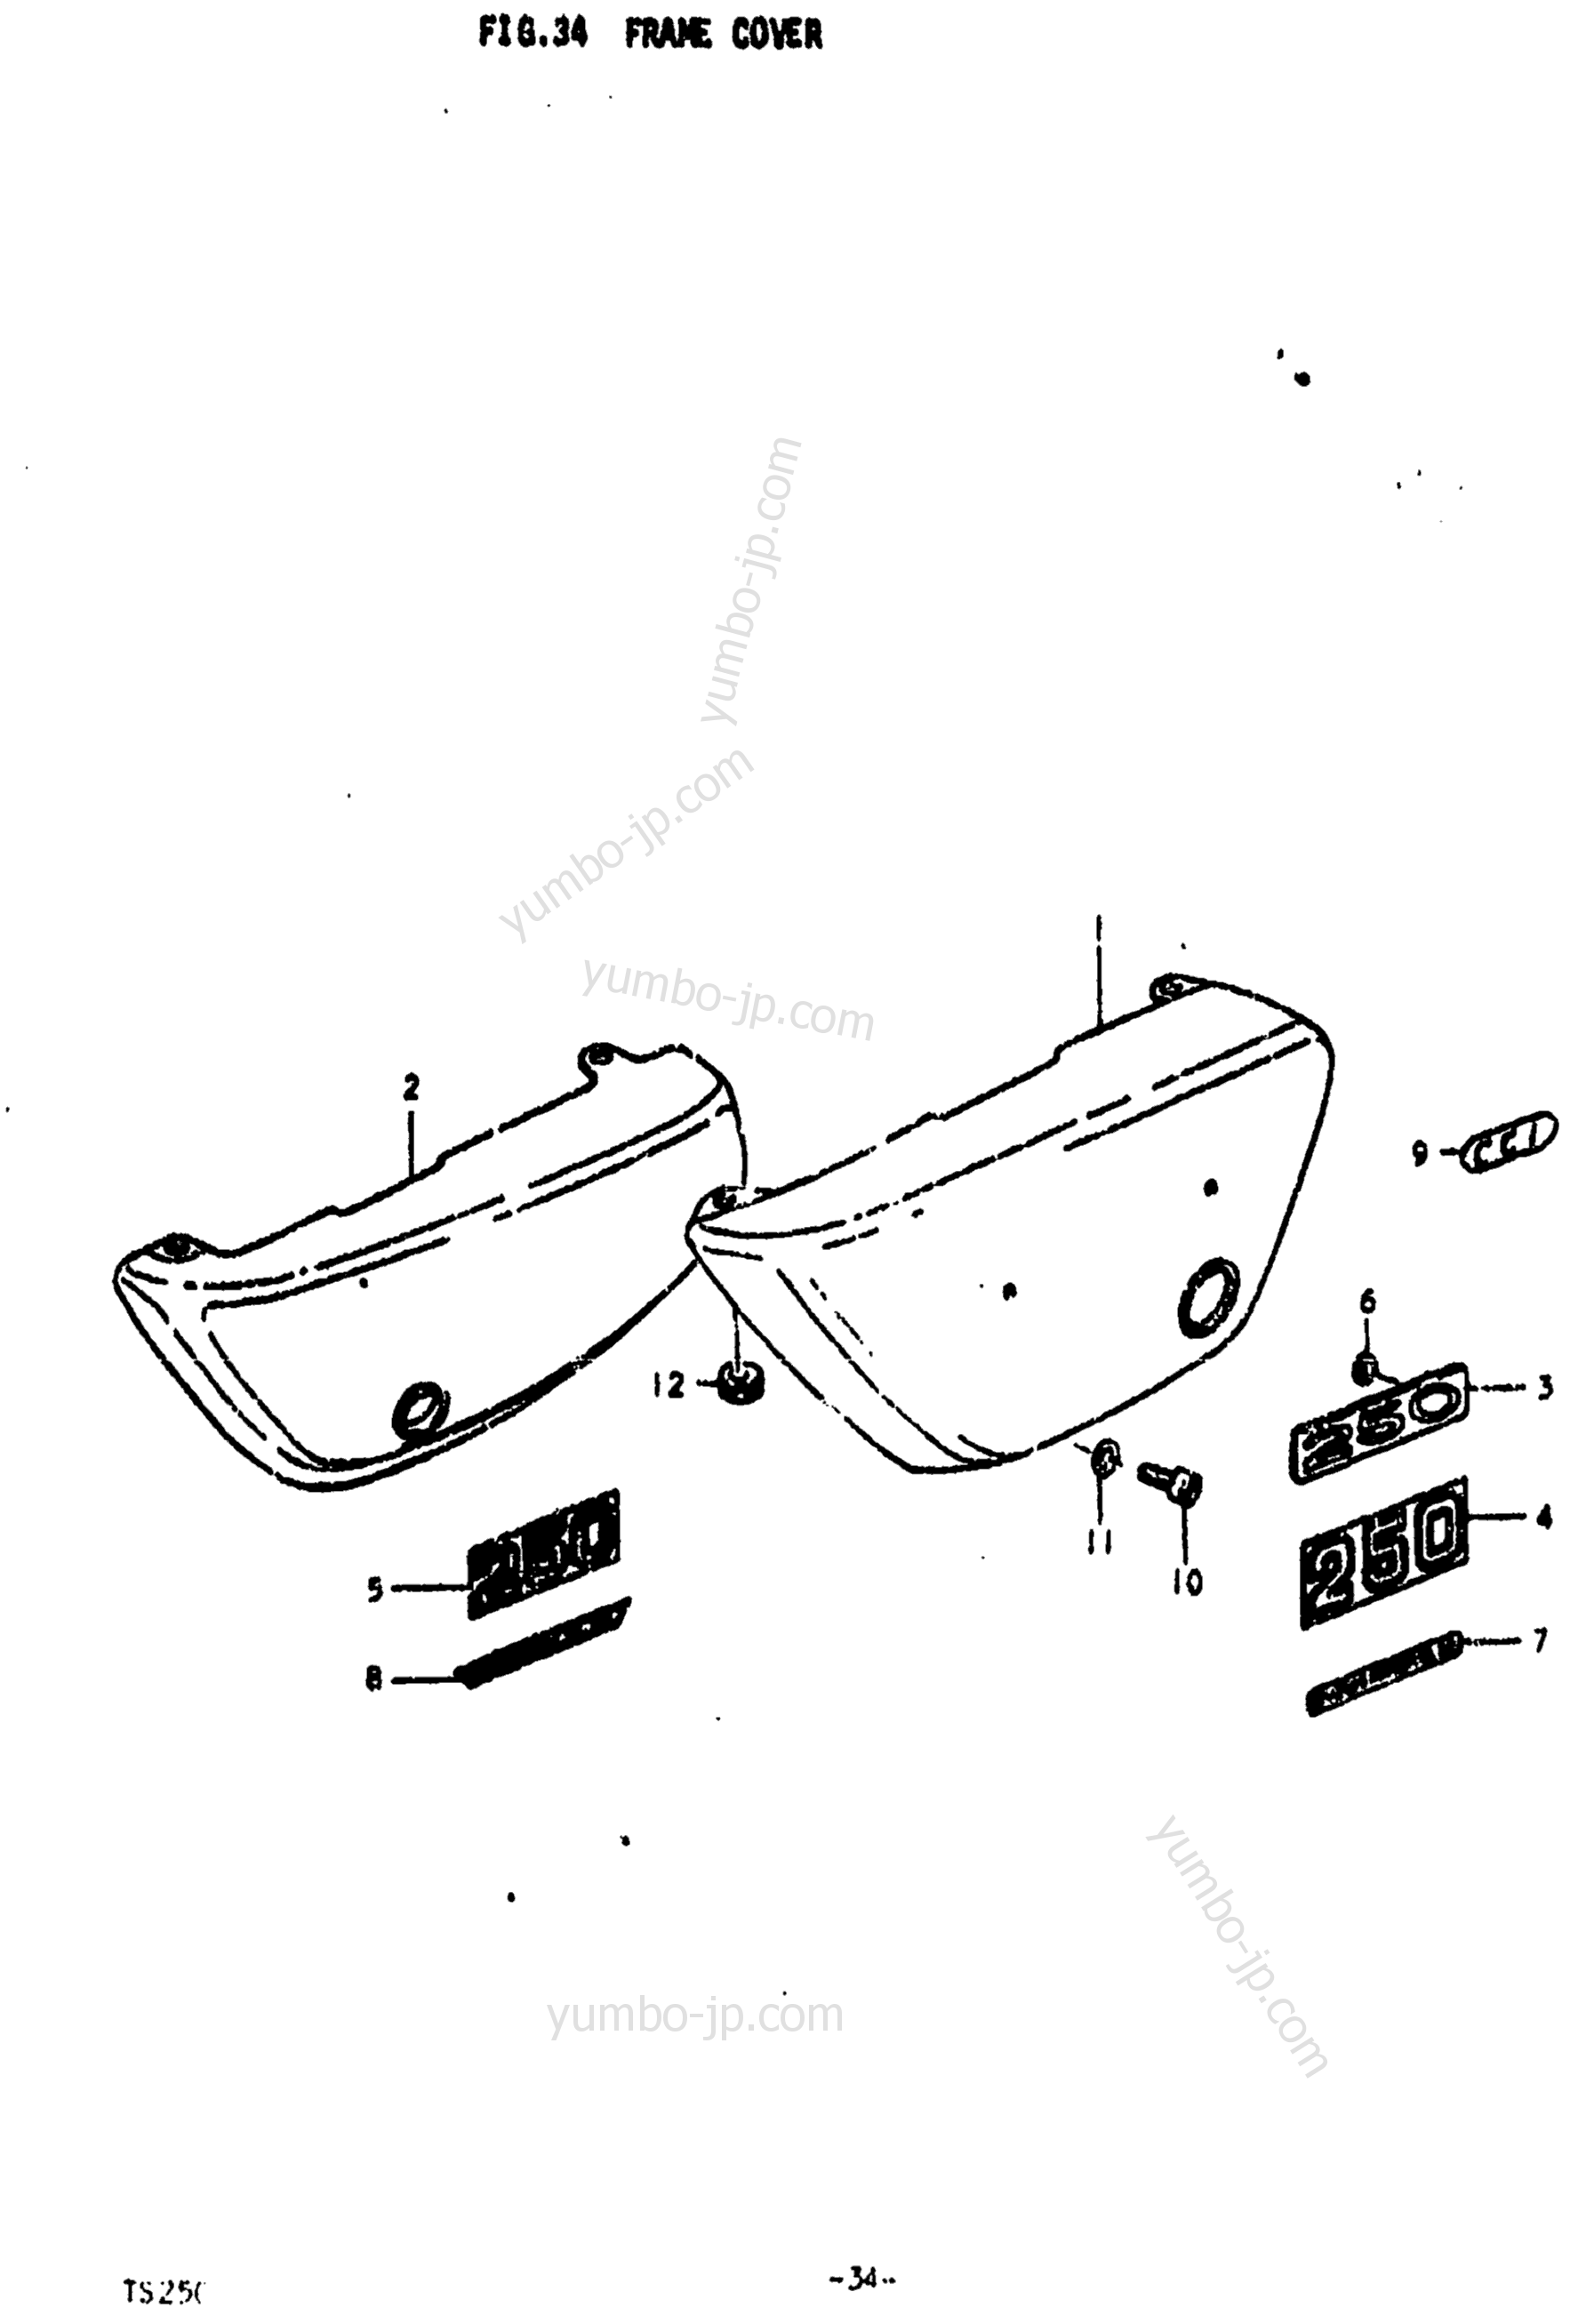 FRAME COVER for motorcycles SUZUKI TS250 1973 year